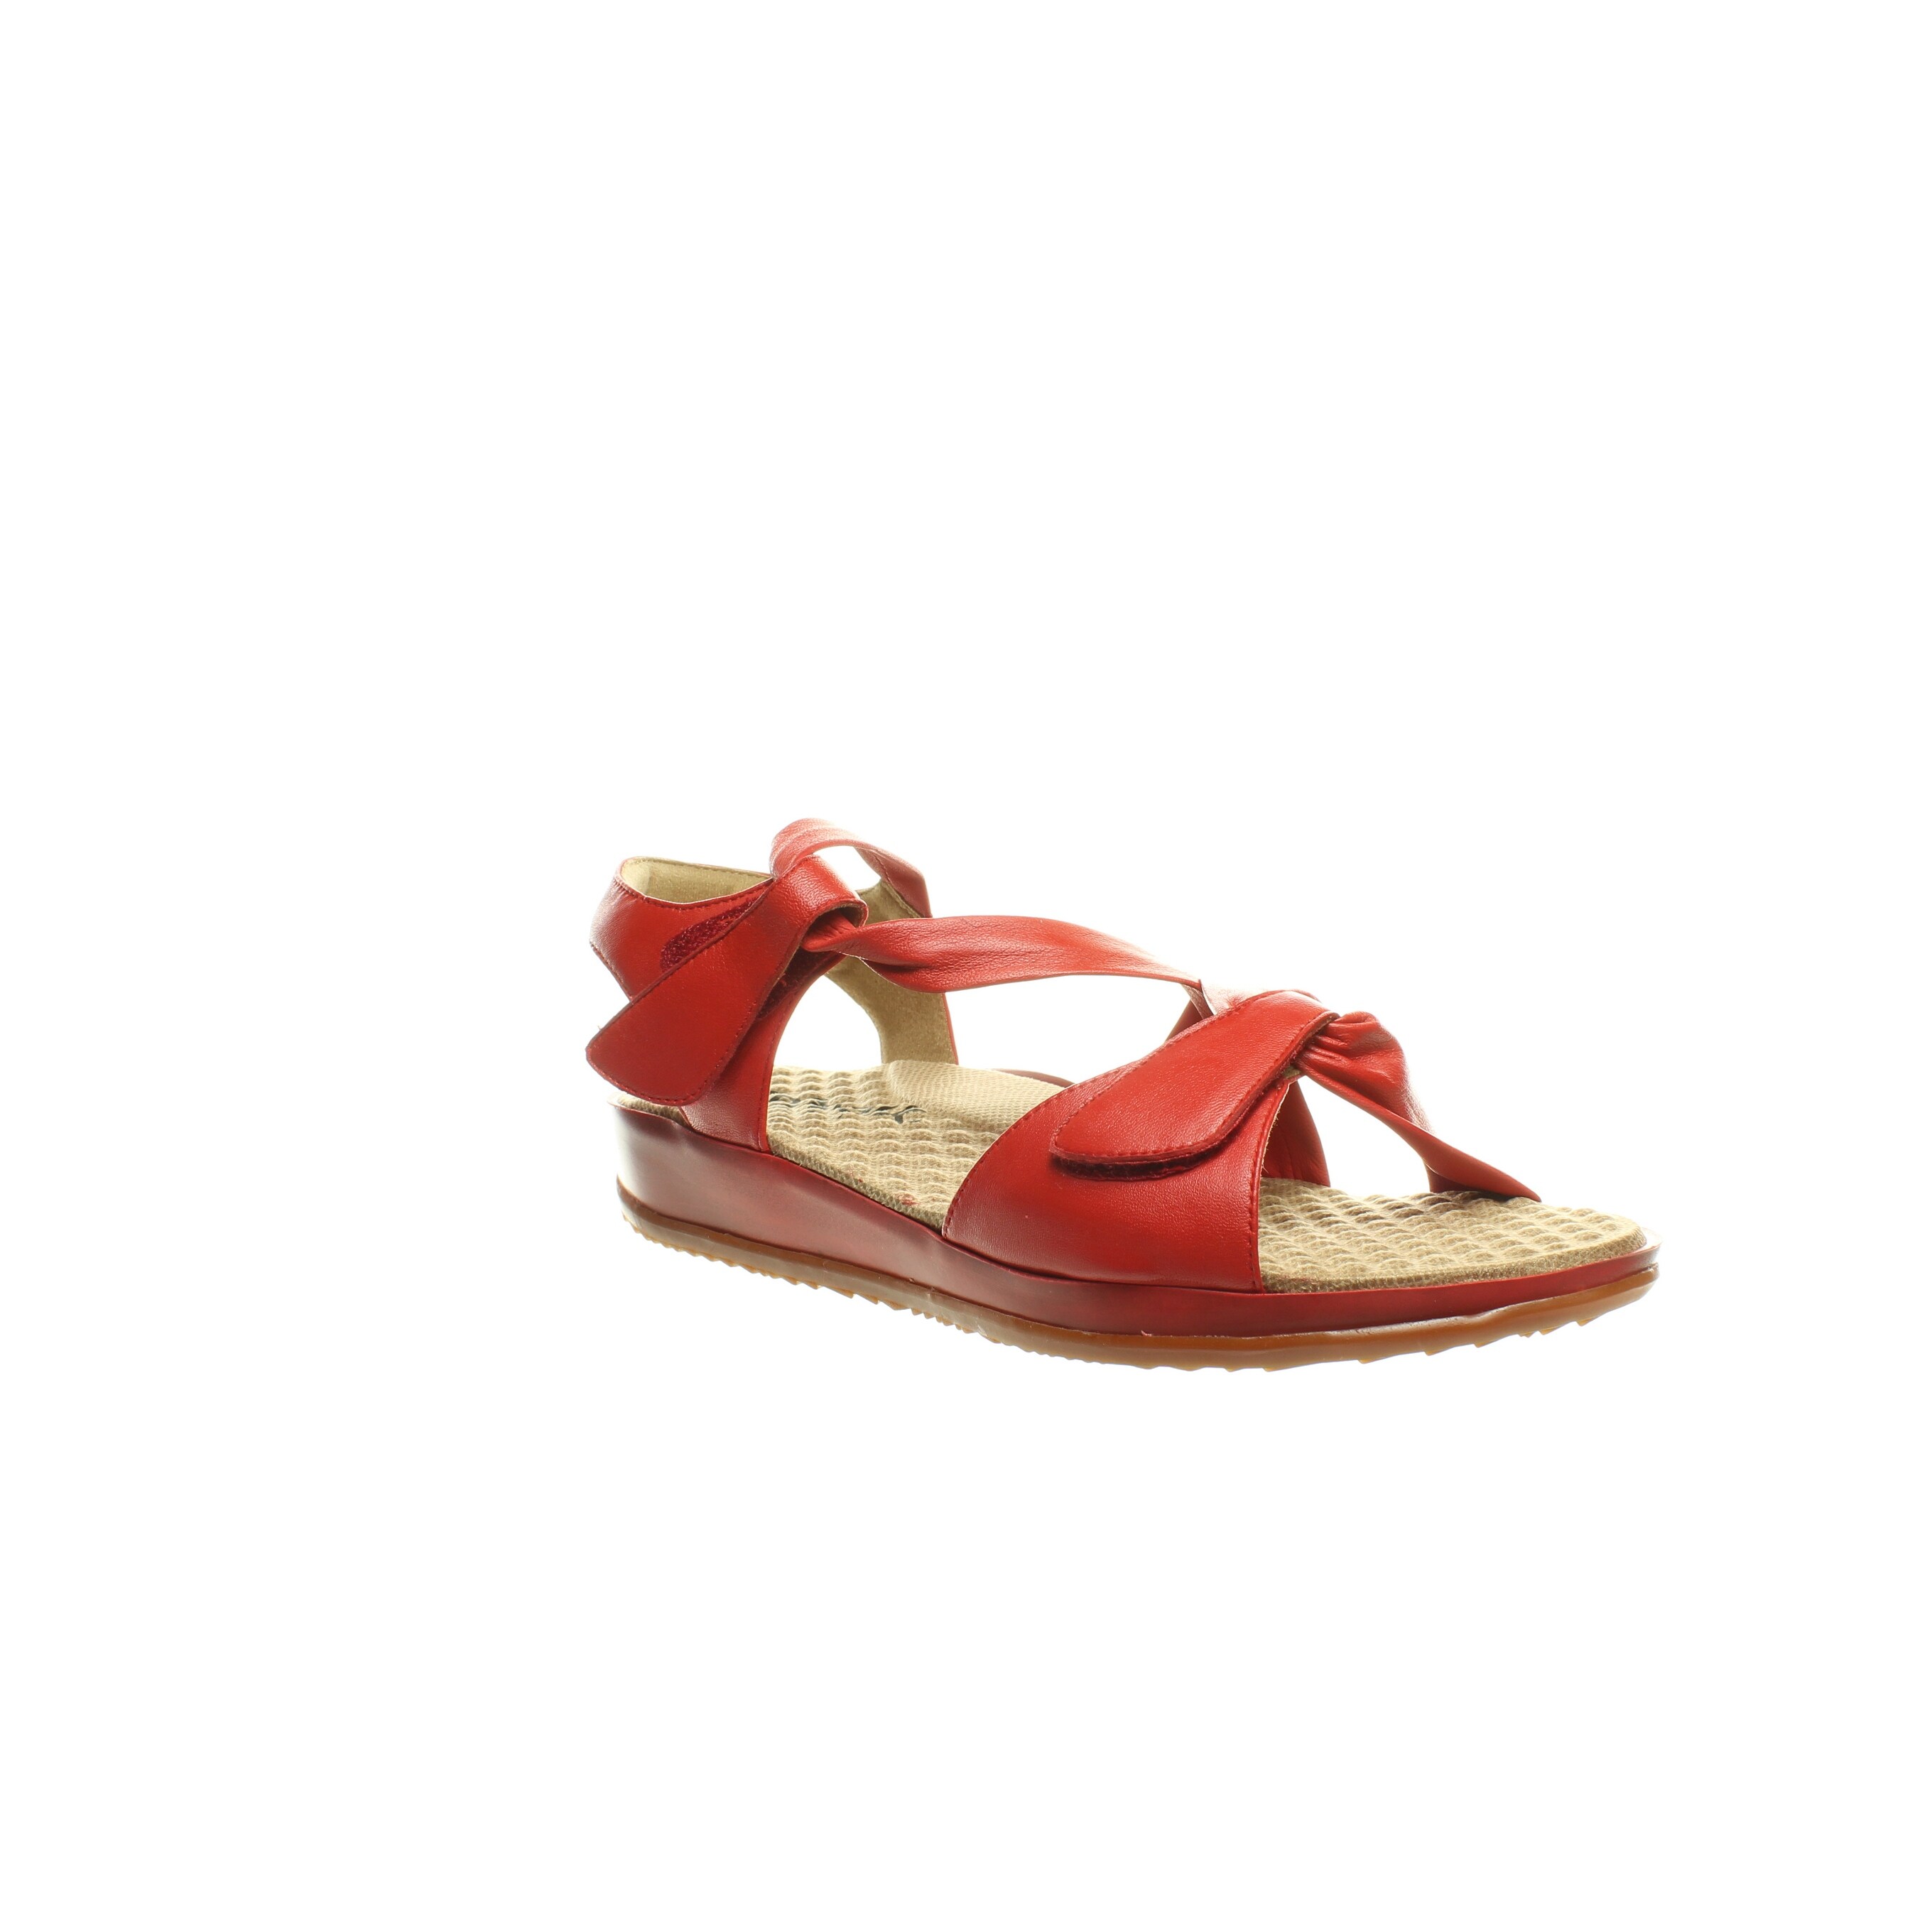 womens red sandals size 8